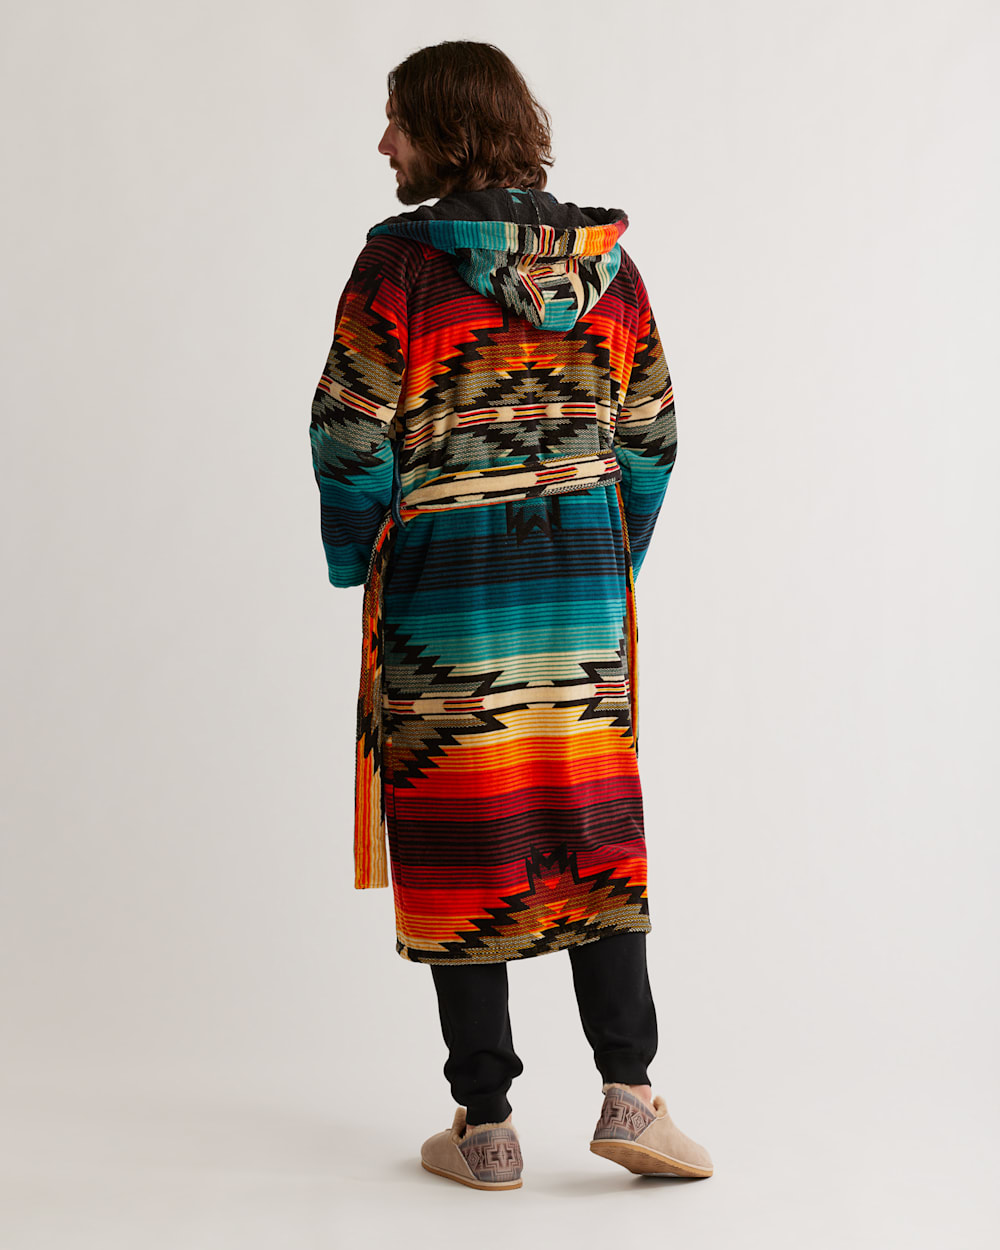 ALTERNATE VIEW OF UNISEX COTTON TERRY VELOUR ROBE IN SALTILLO SUNSET image number 8